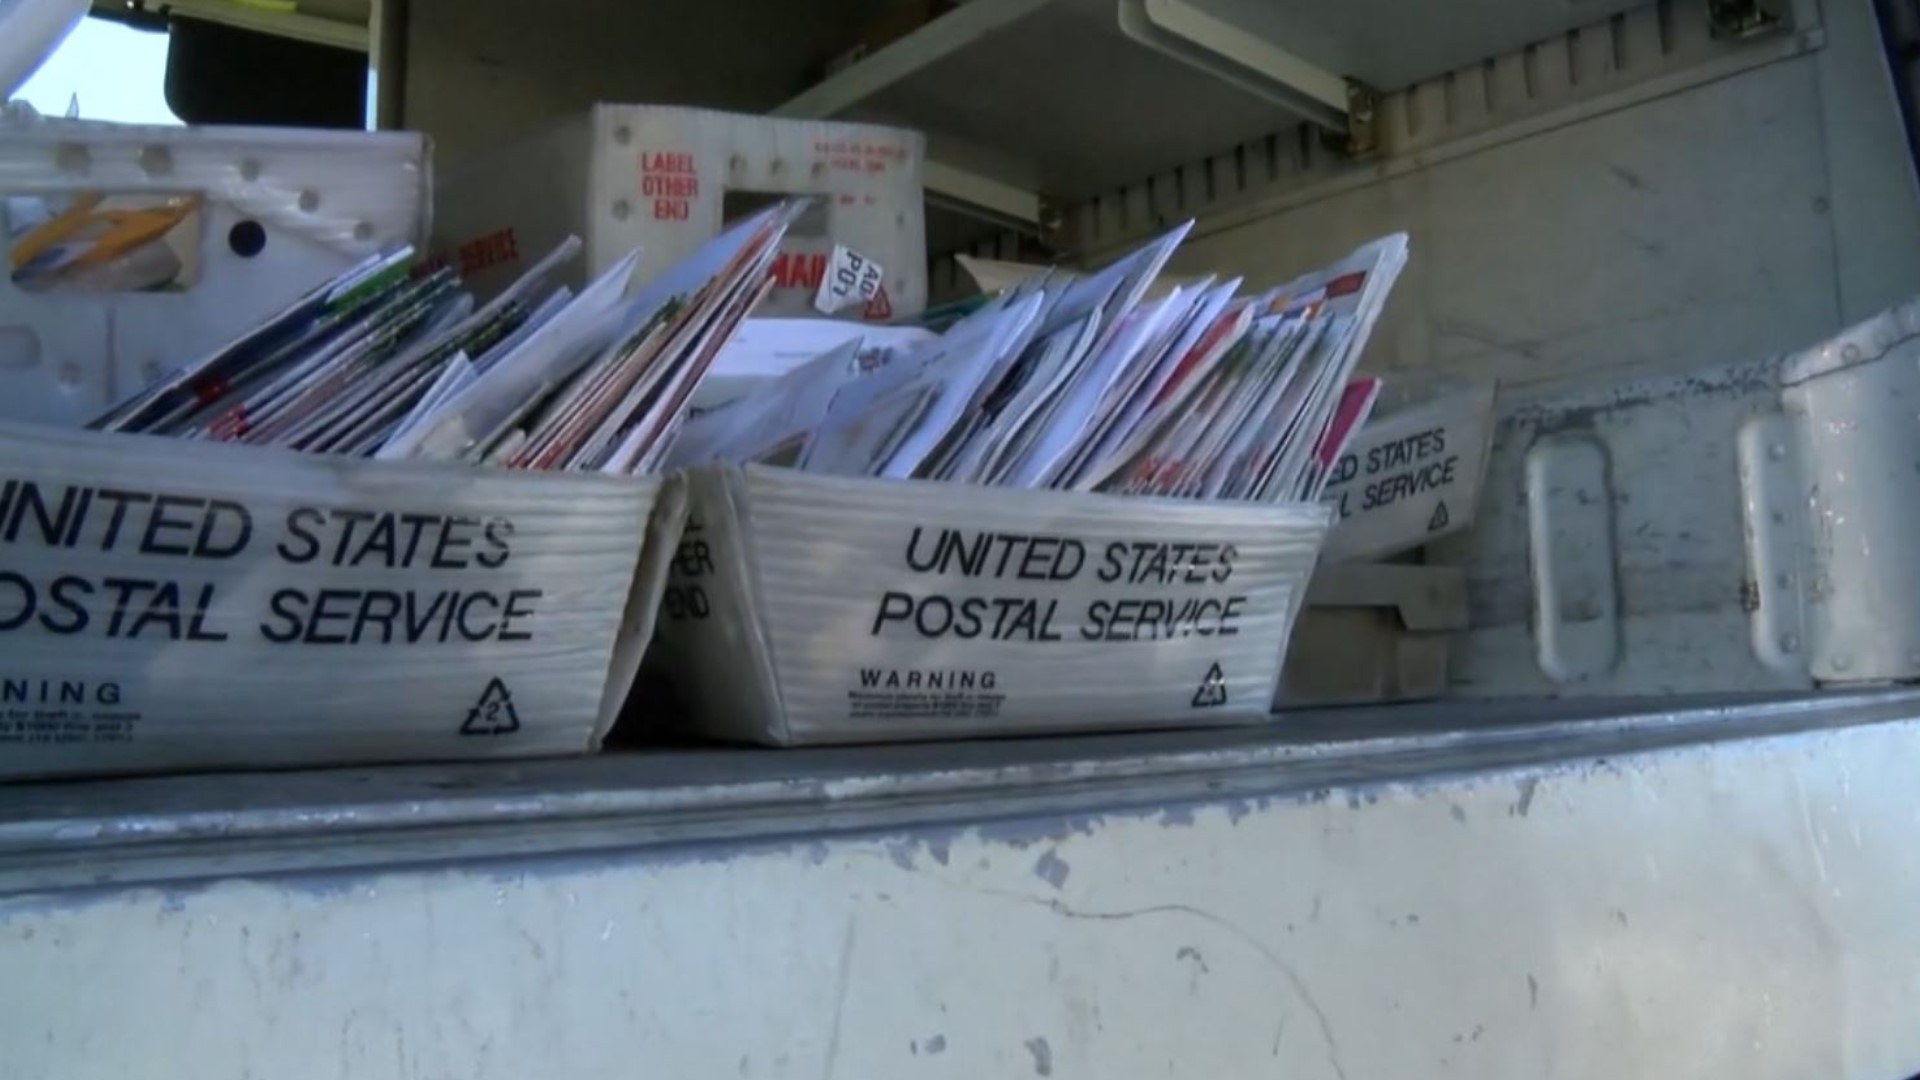 Many are sounding off, saying that some holiday packages are still “stuck in transit” with the USPS. What’s the deal? Newswatch 16’s Ryan Leckey got some answers.